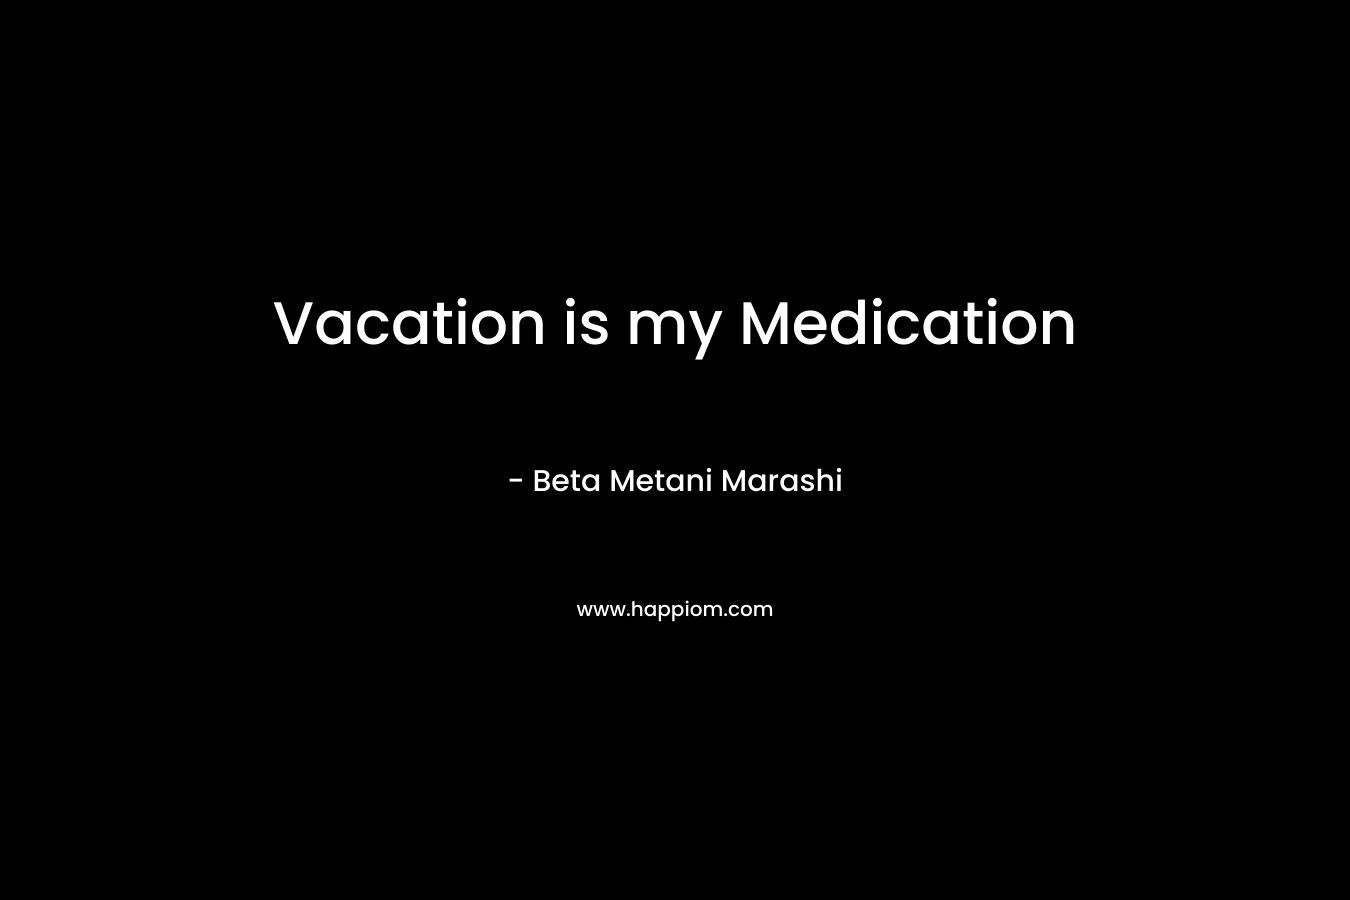 Vacation is my Medication